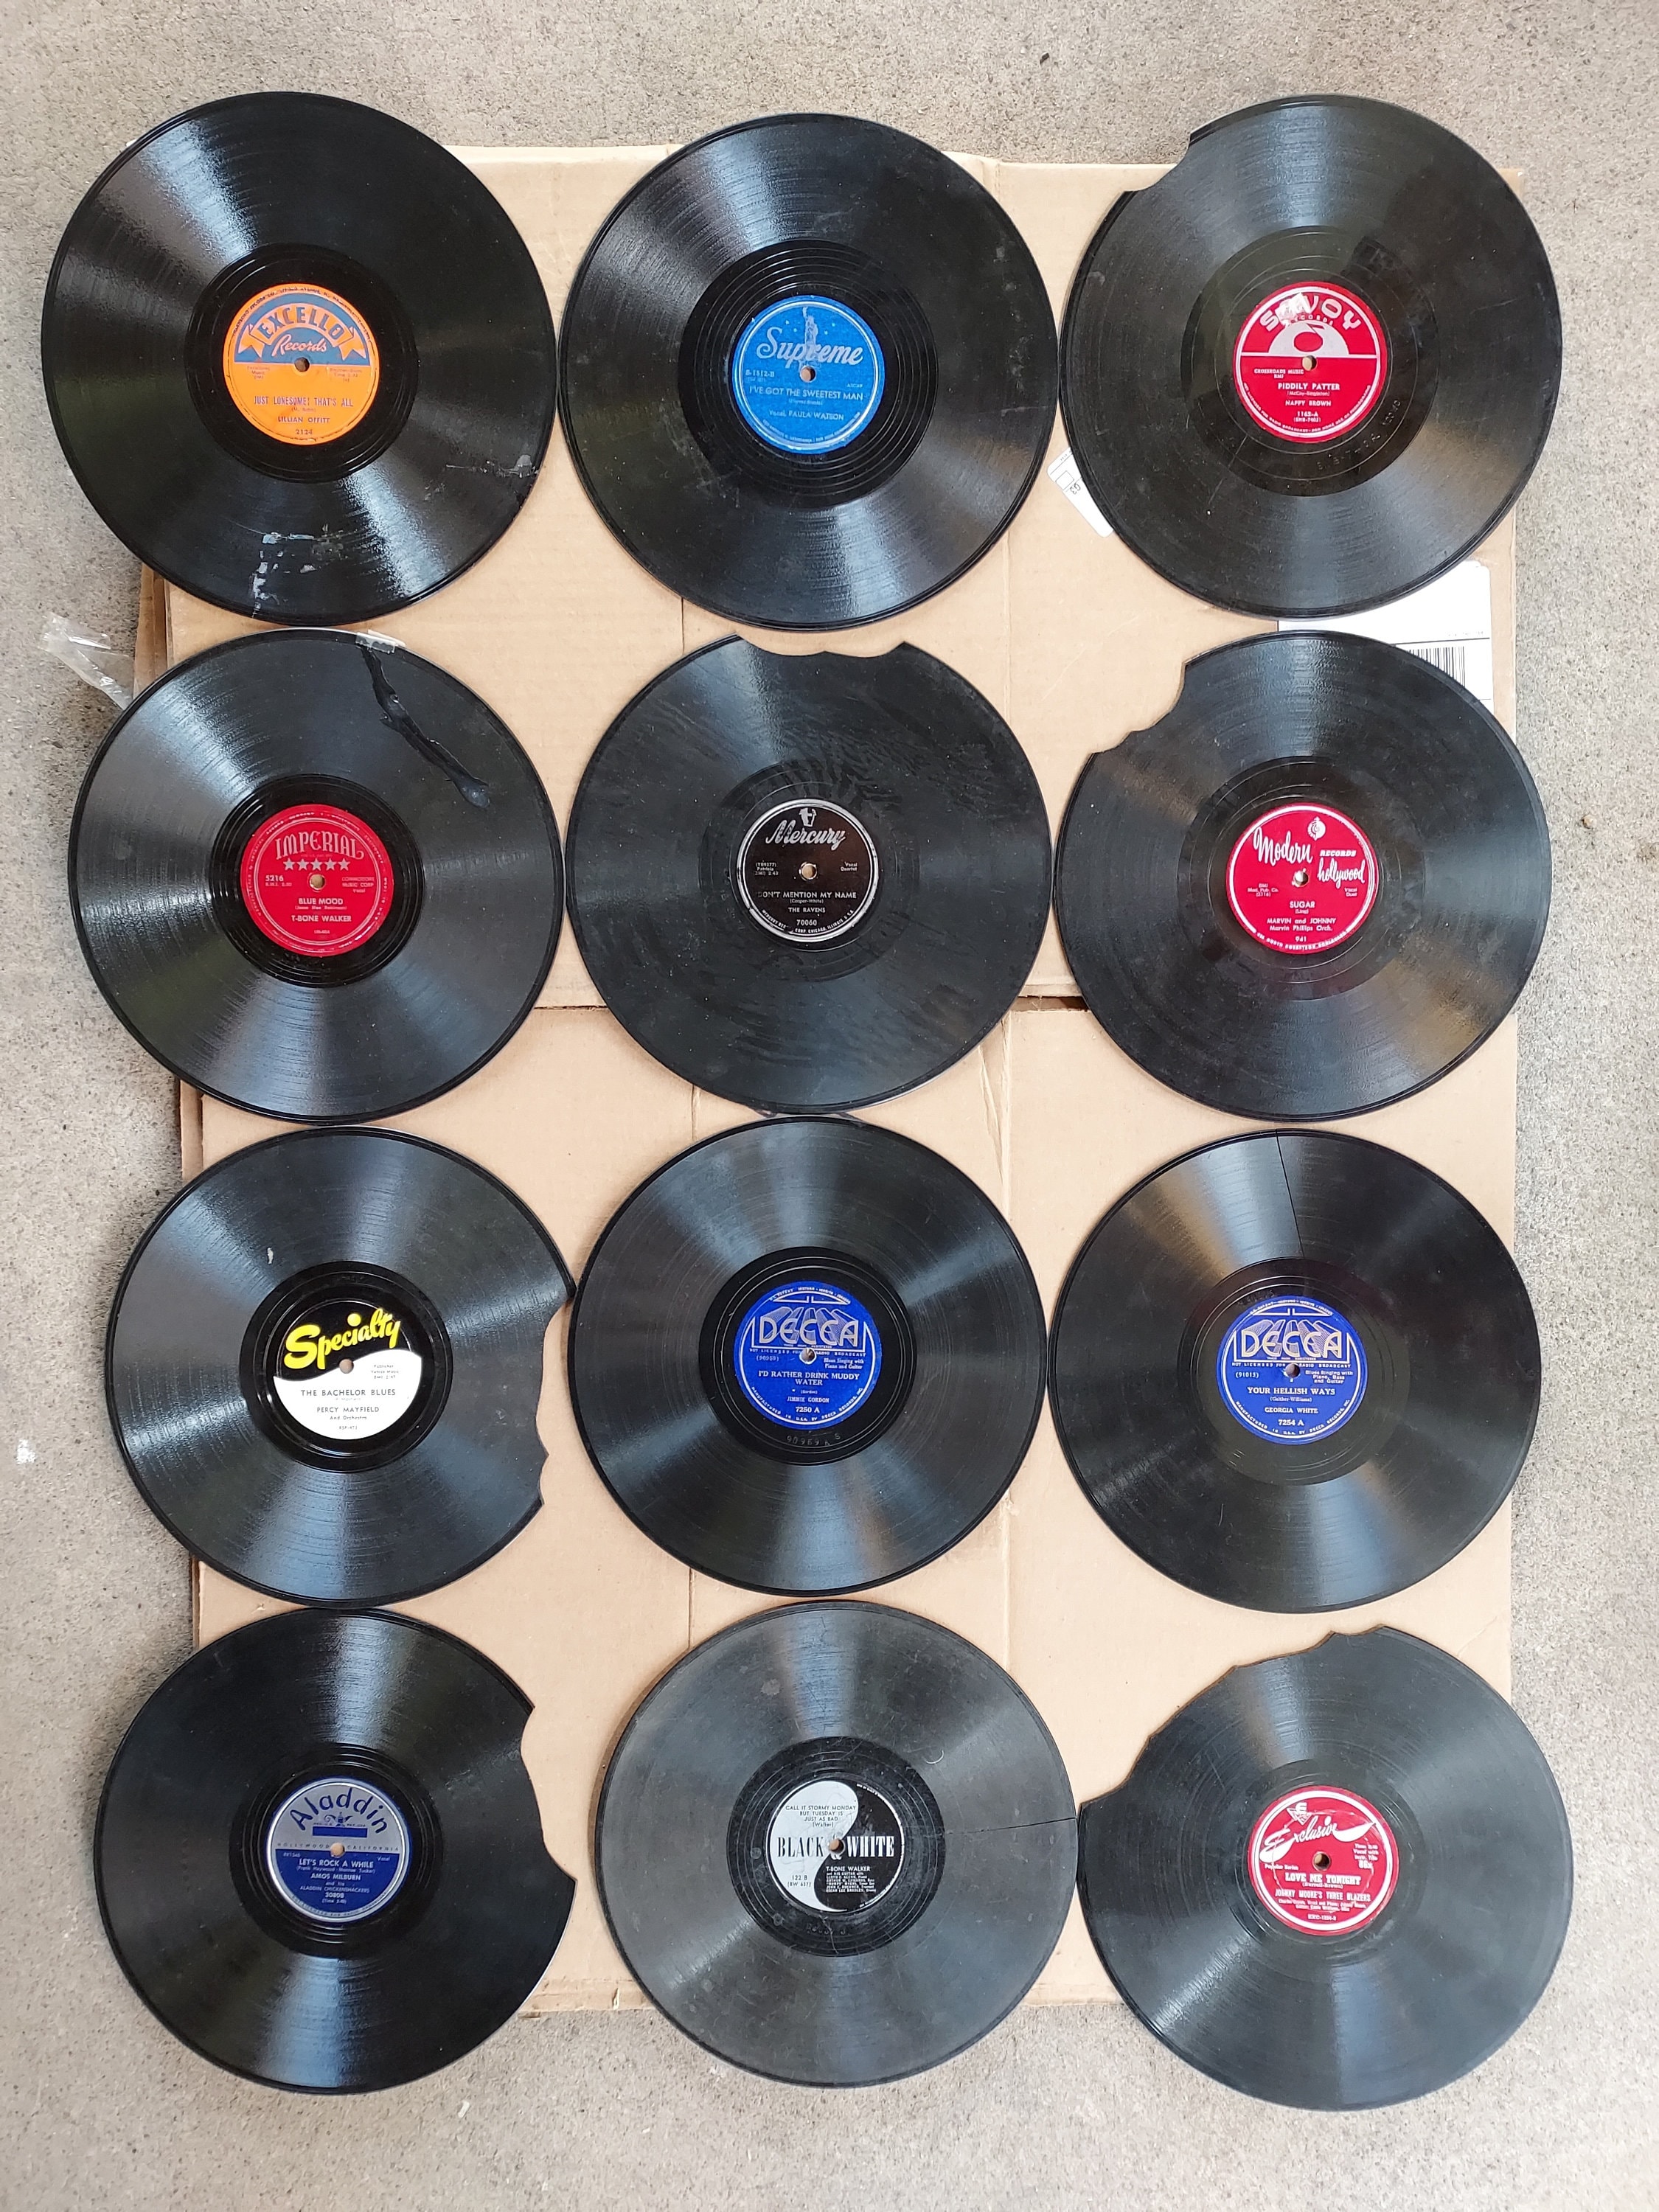 A TRIBUTE TO THE GREAT AL JOLSON / THE INK SPOTS Vinyls (Records Only)